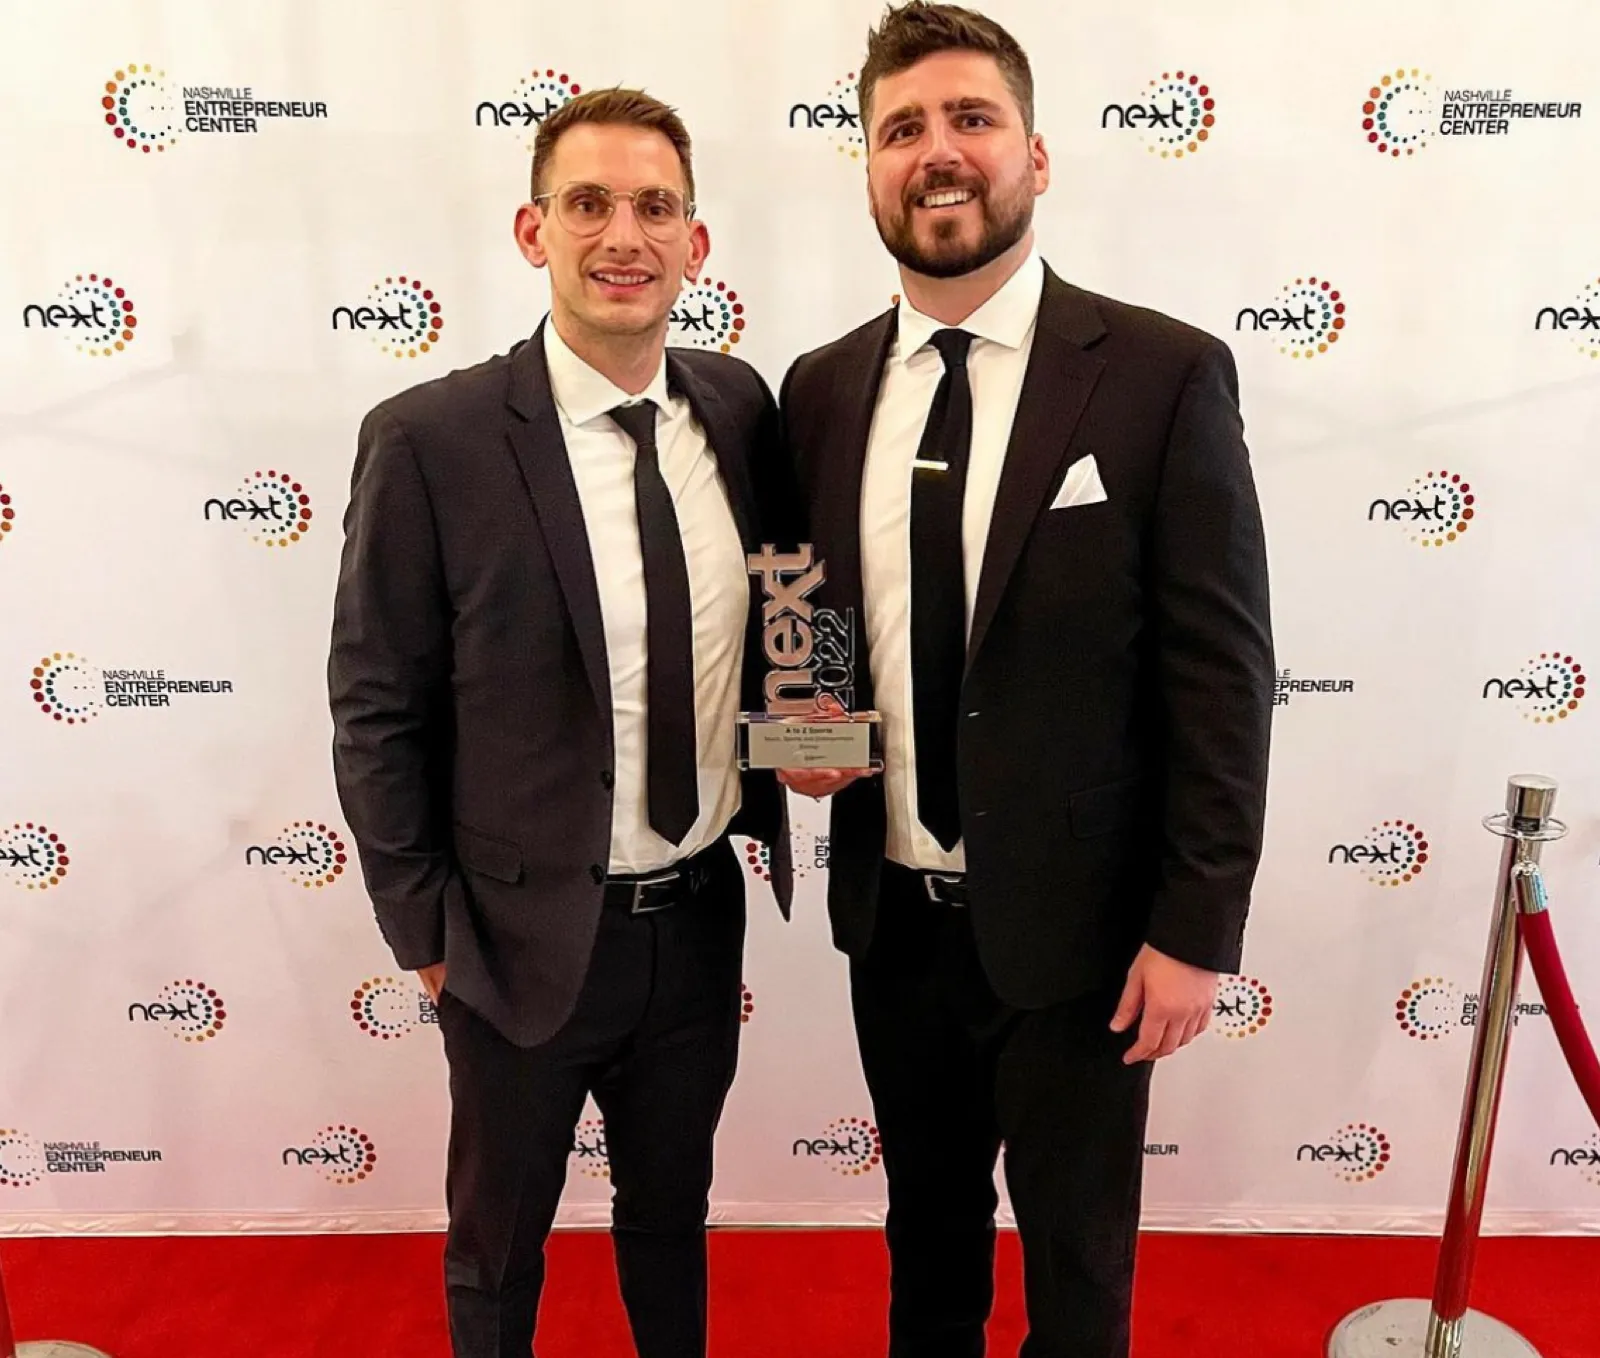 The A to Z co-founders accept an award